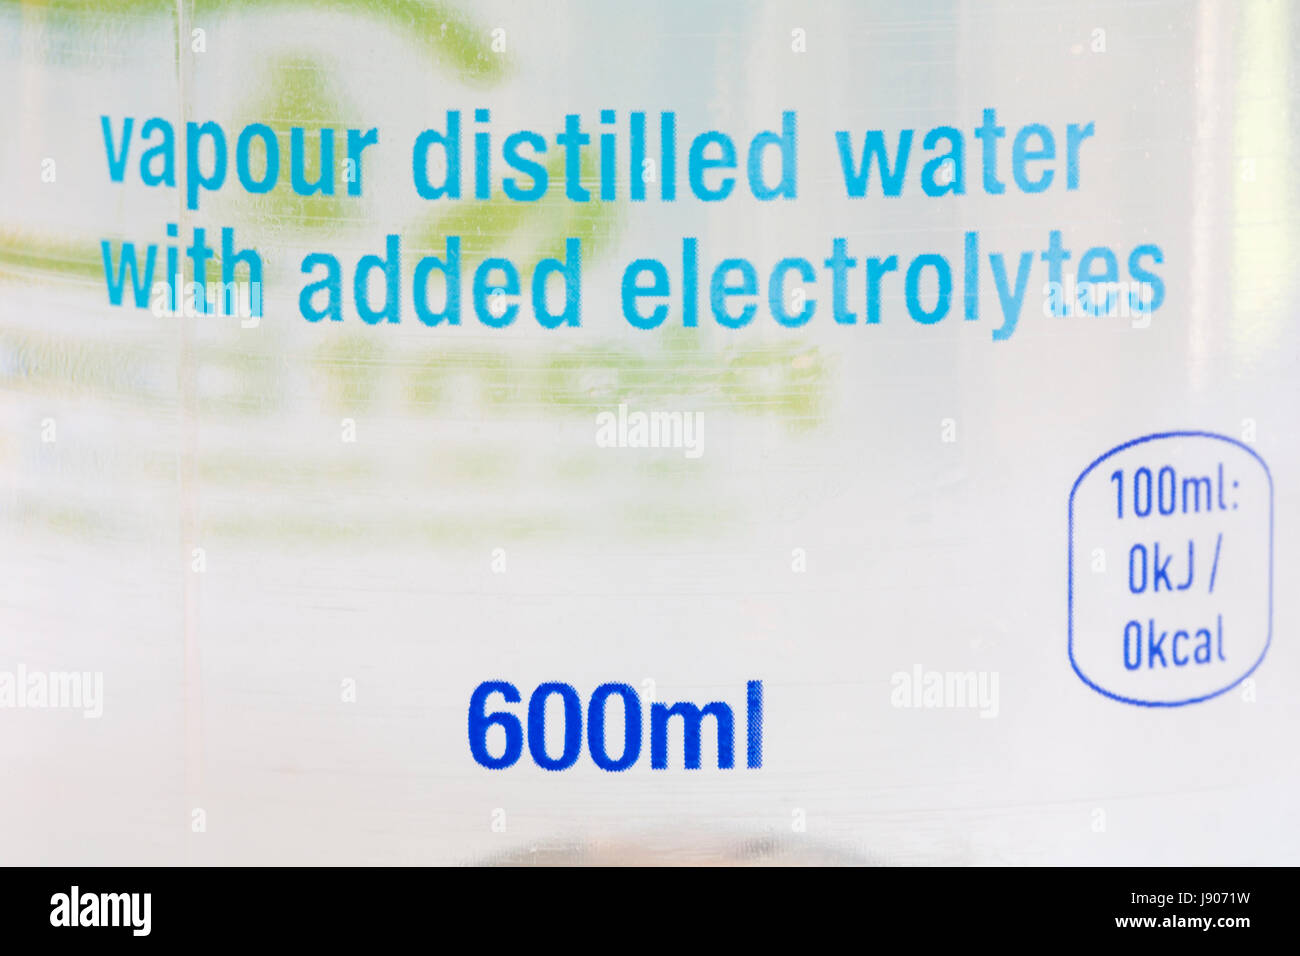 vapour distilled water with added electrolytes - information on bottle of Glaceau smart water Stock Photo